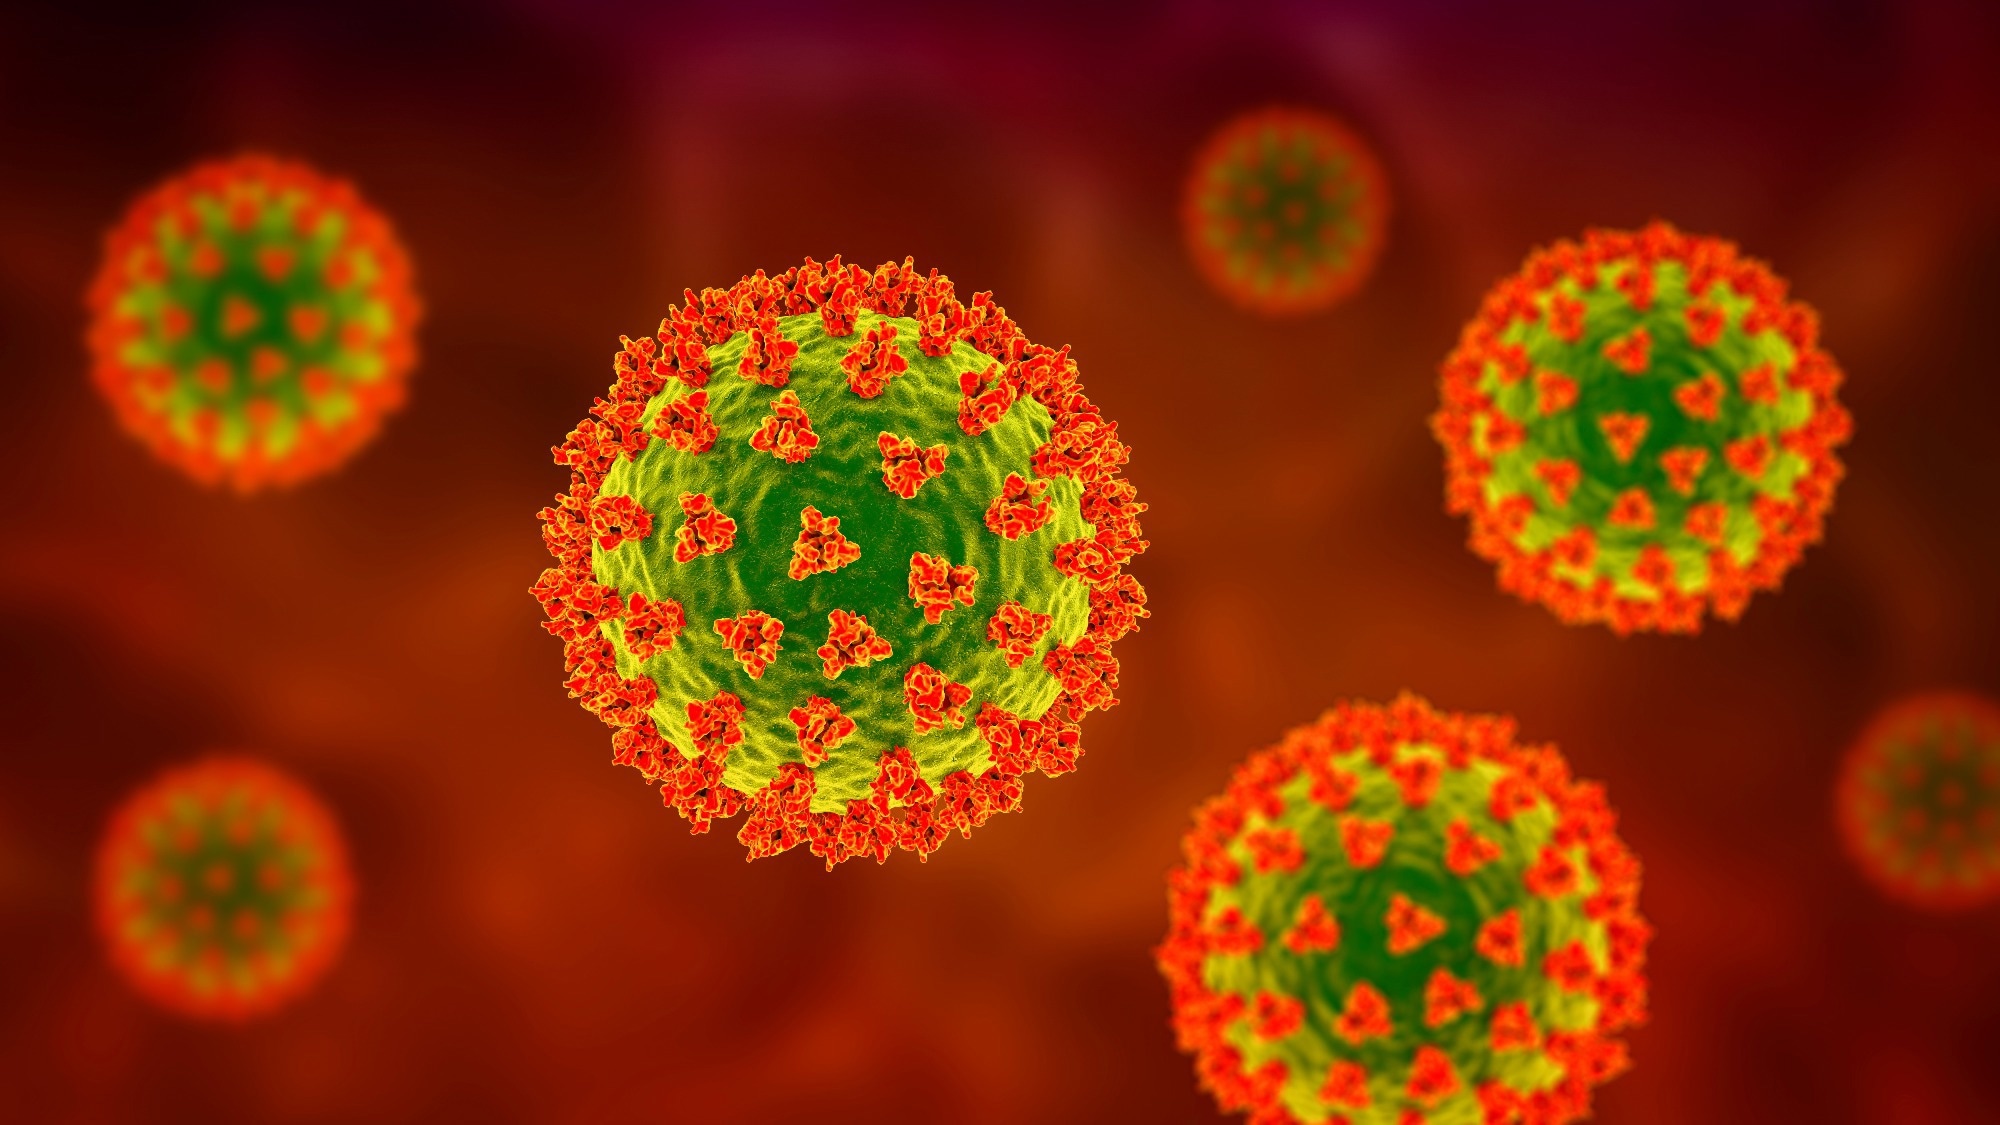 Study: Previous immunity shapes immune responses to SARS-CoV-2 booster vaccination and Omicron breakthrough infection risk. Image Credit: Kateryna Kon / Shutterstock.com